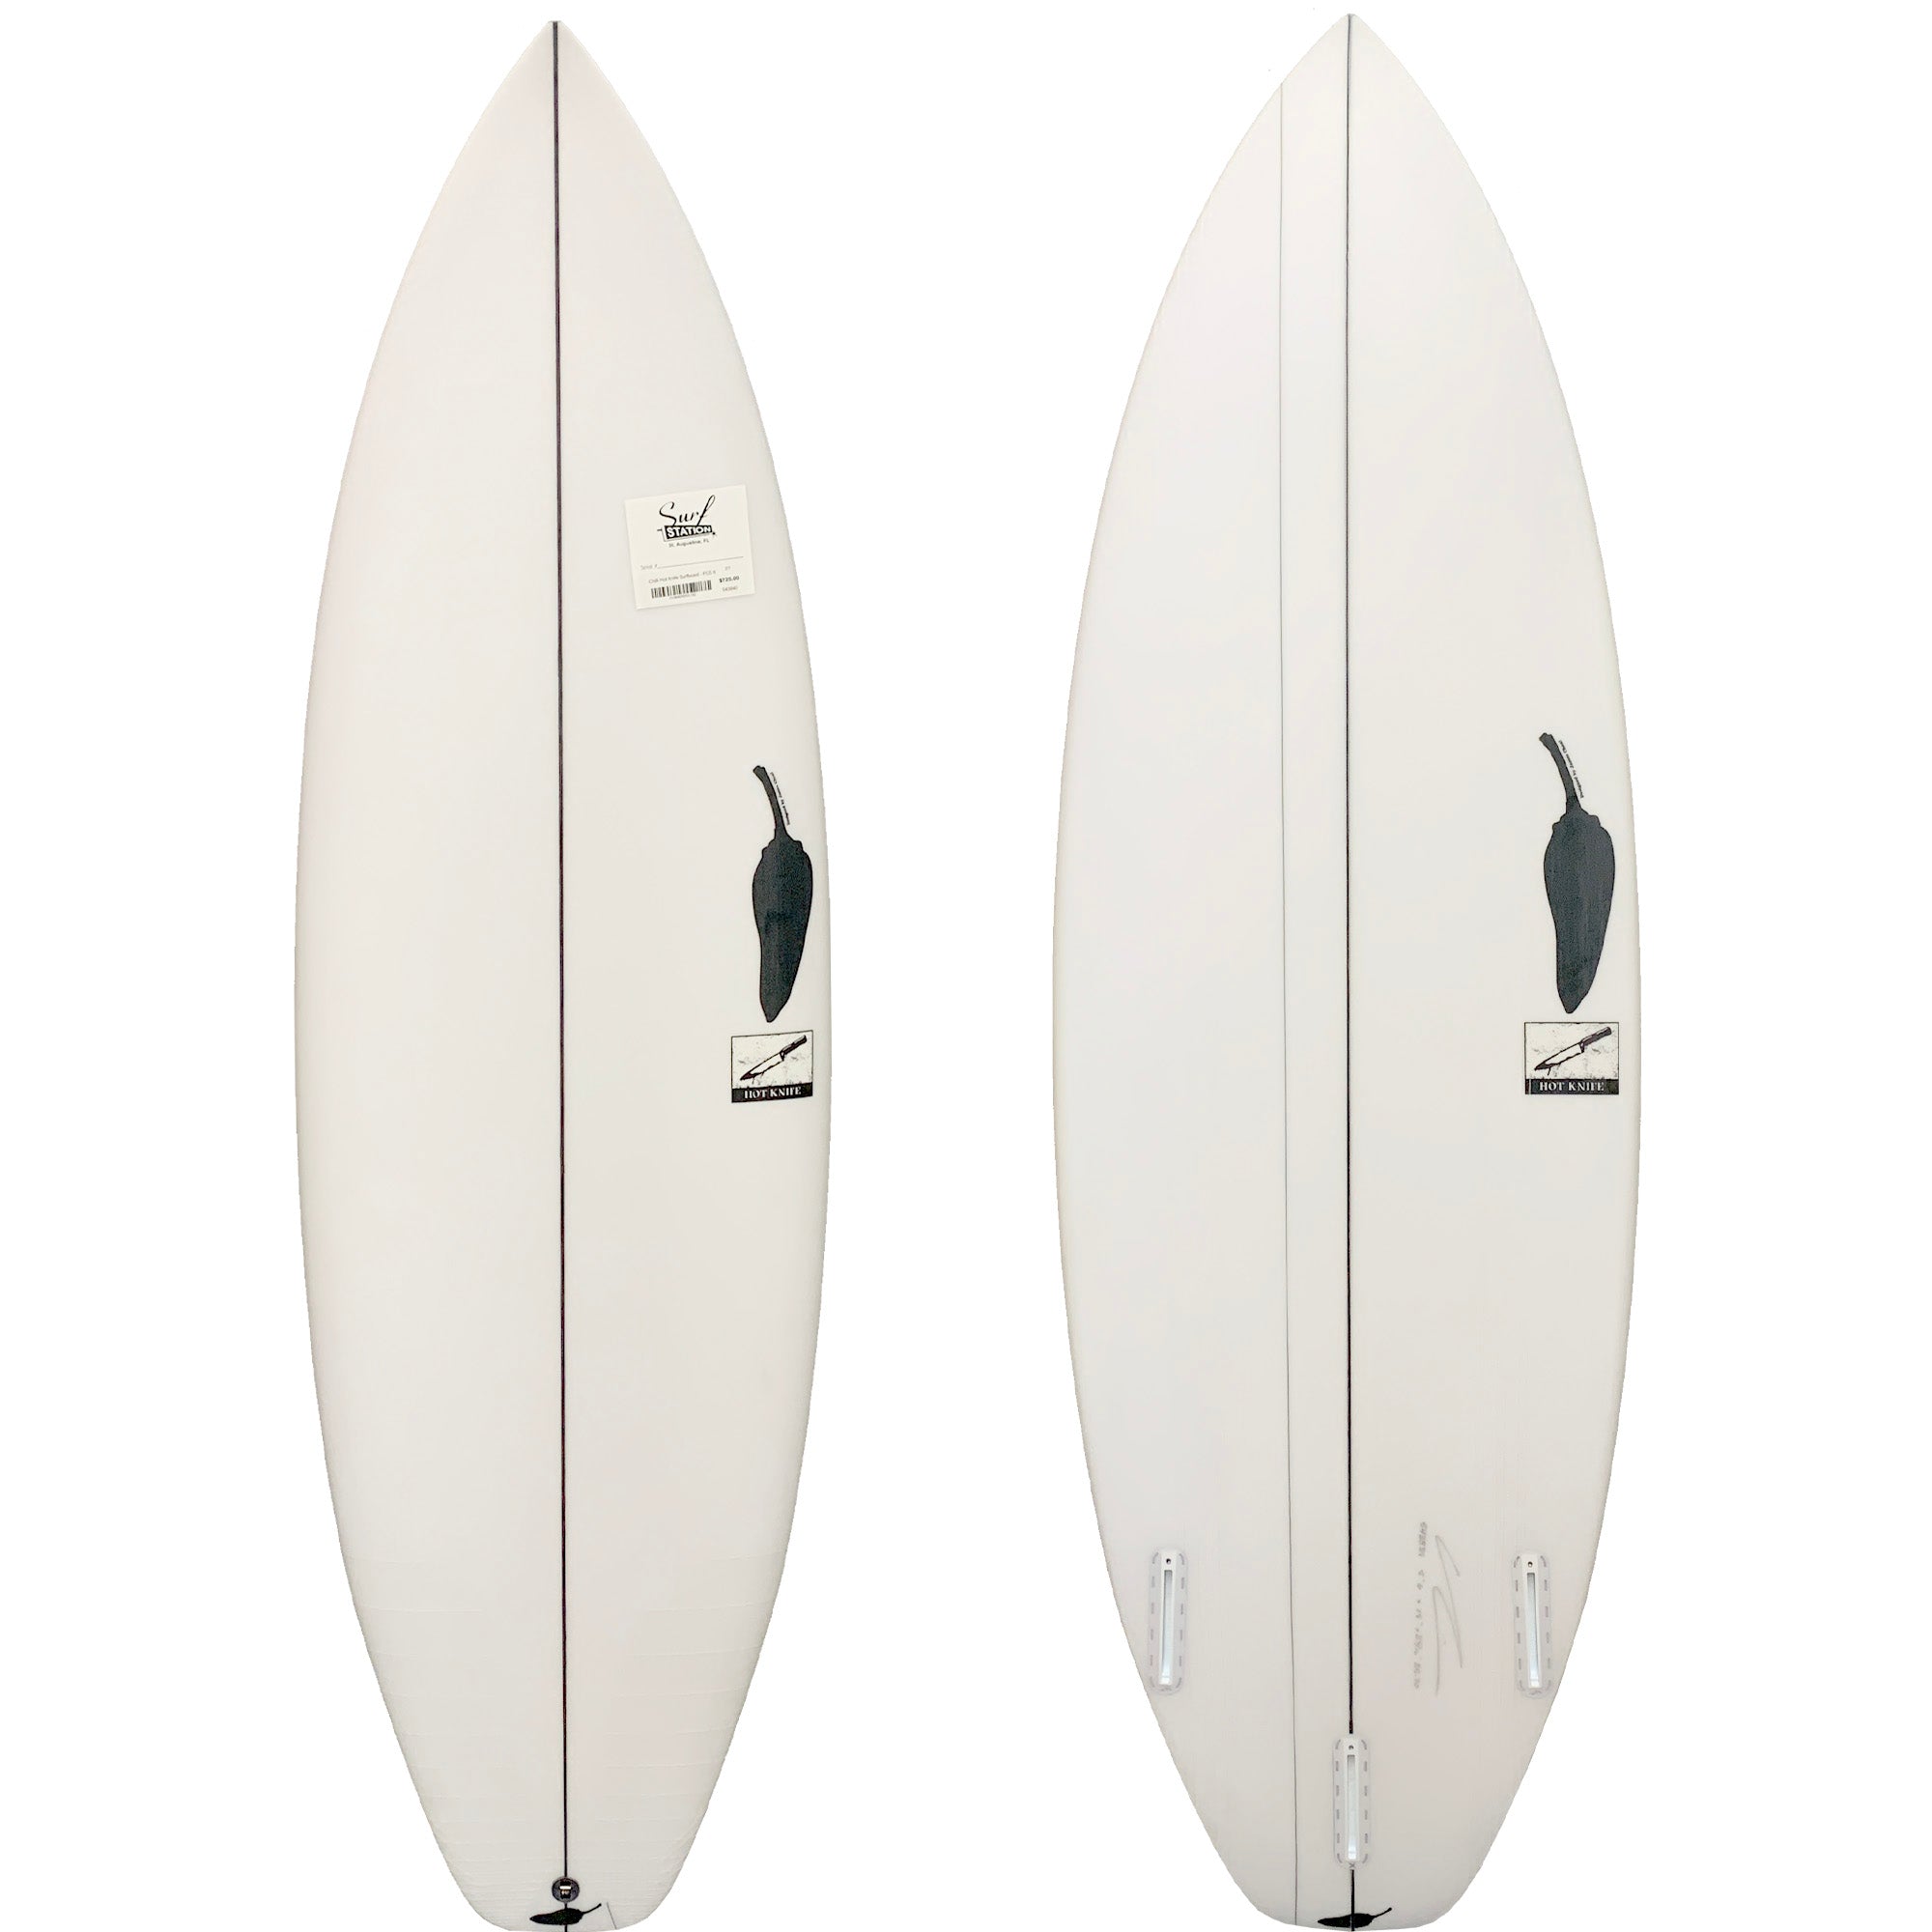 Chilli Hot Knife Surfboard - Futures